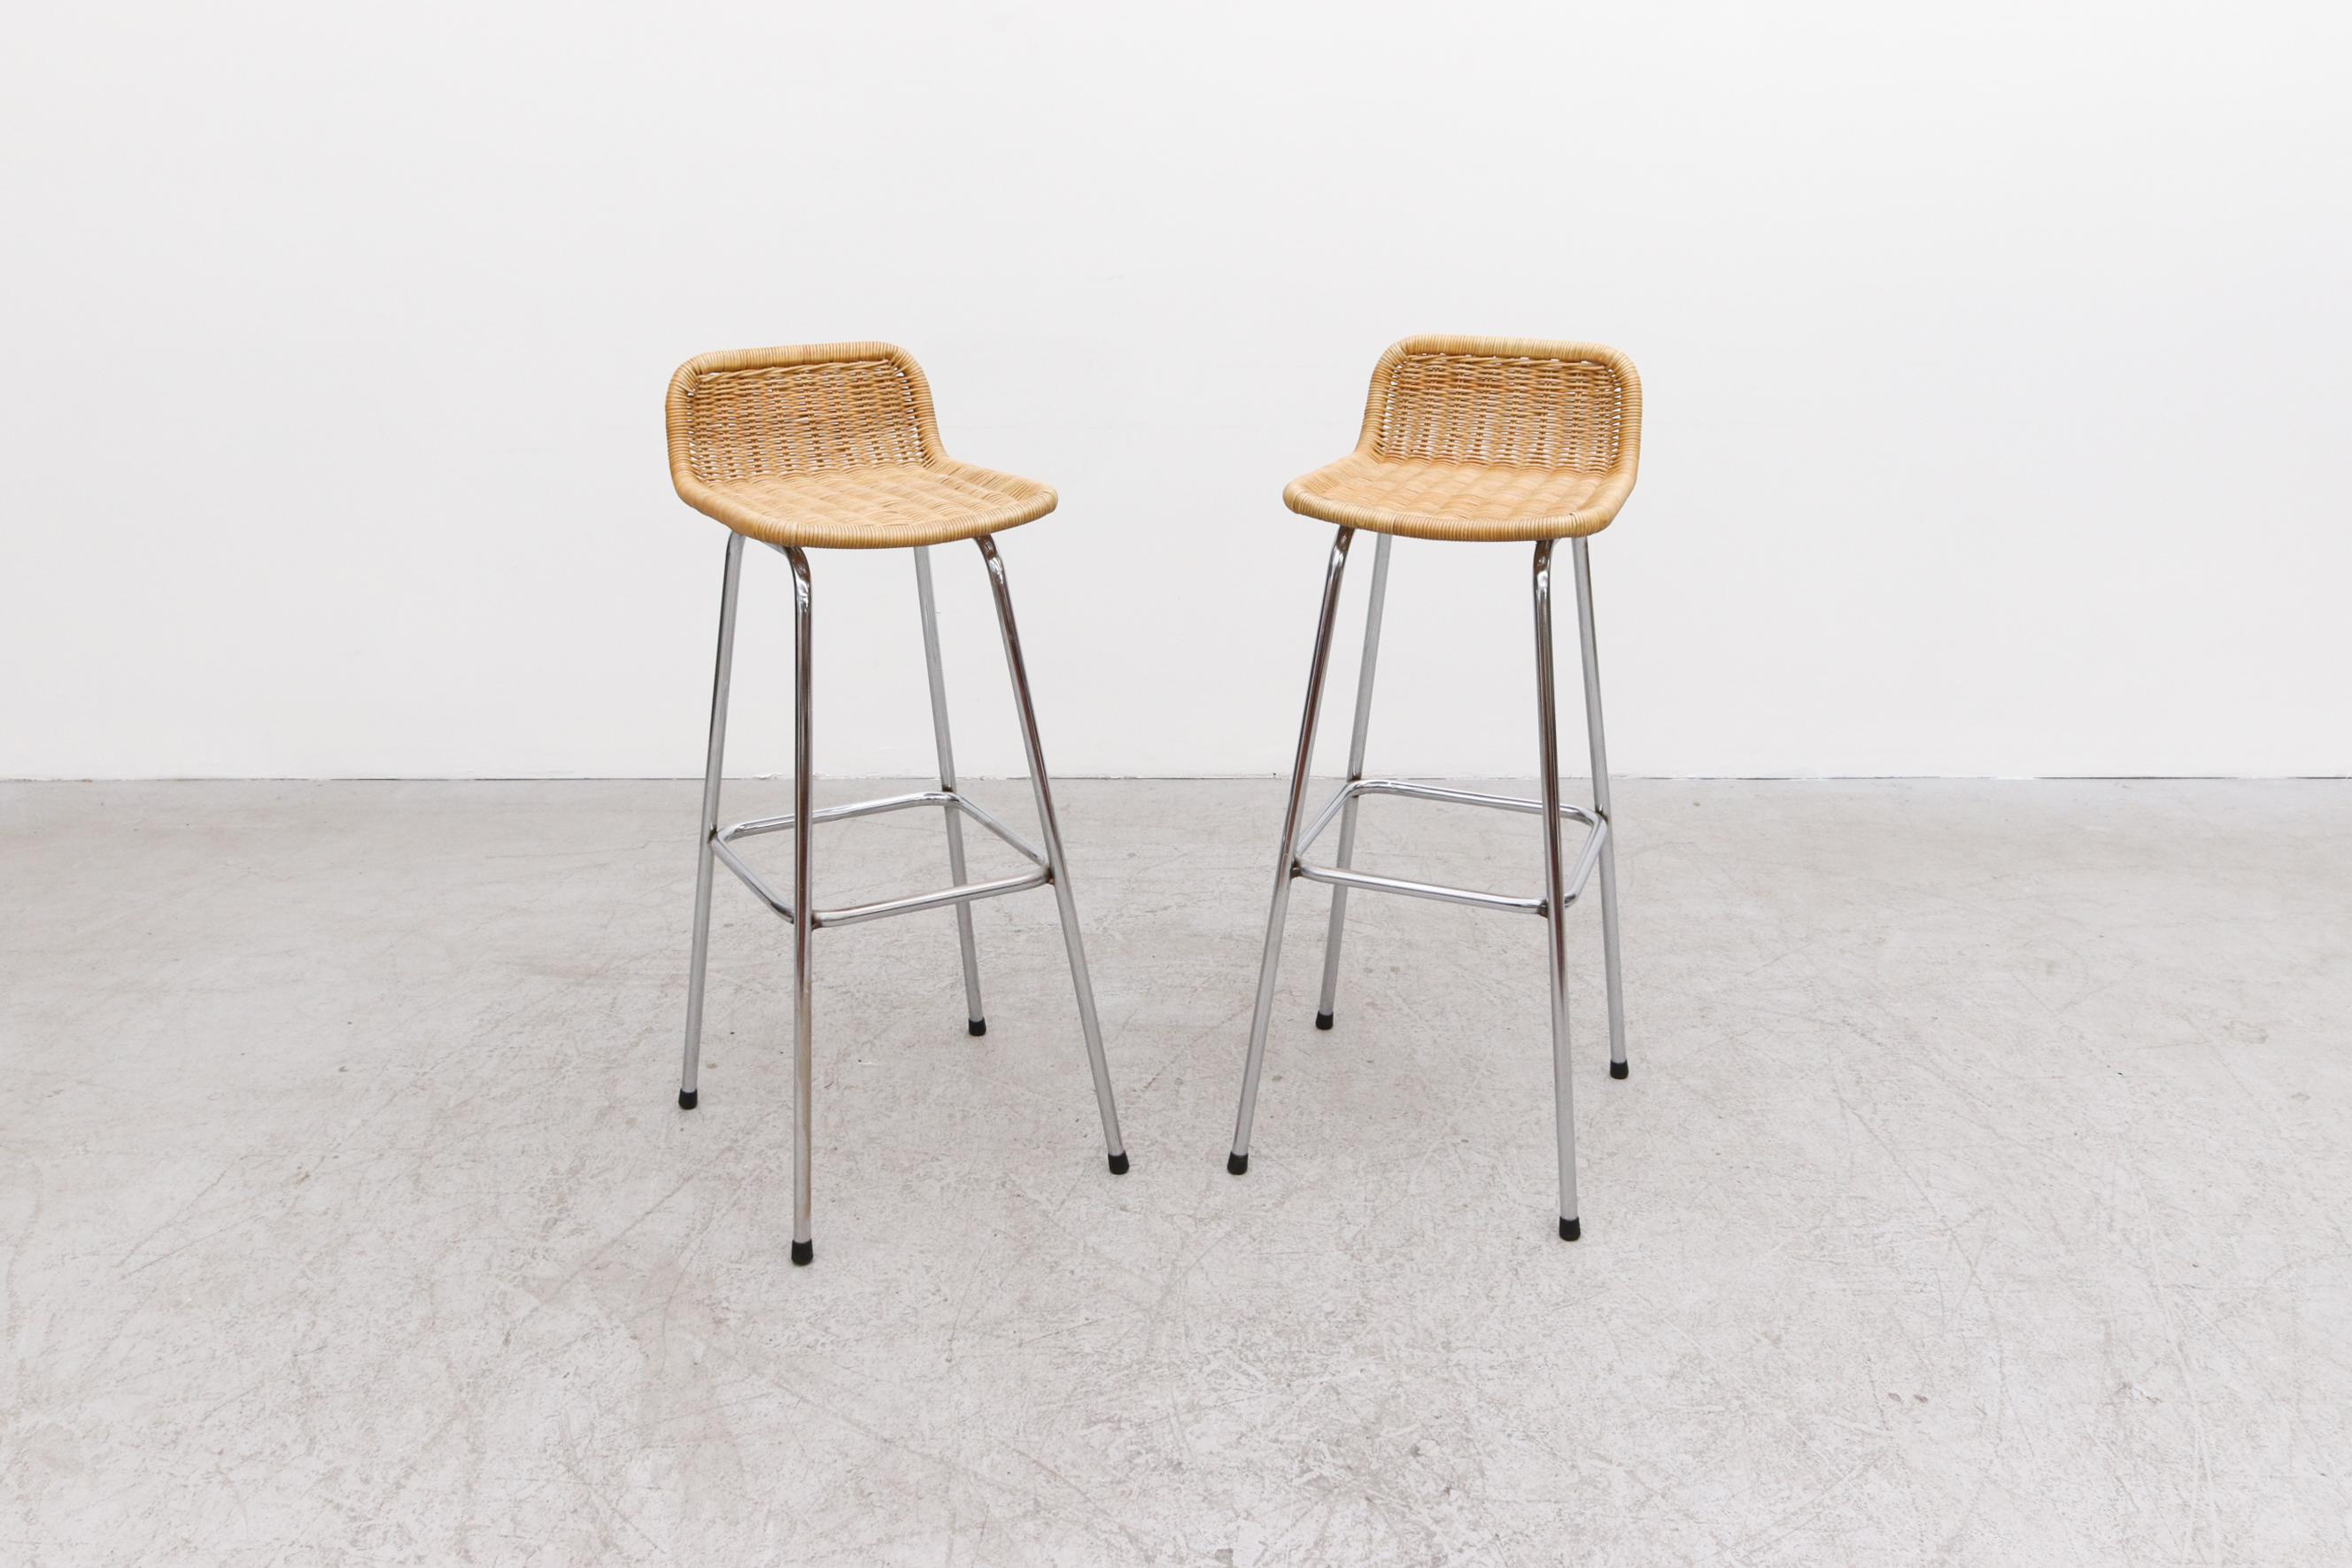 Pair of Charlotte Perriand Style Bar Stools with Low Rounded Rattan Seat Backs and Chrome Tubular Frames. Inspired by  the famous 'Les Arcs' stools by French architect and designer Charlotte Perriand that were designed as part of the acclaimed Arc